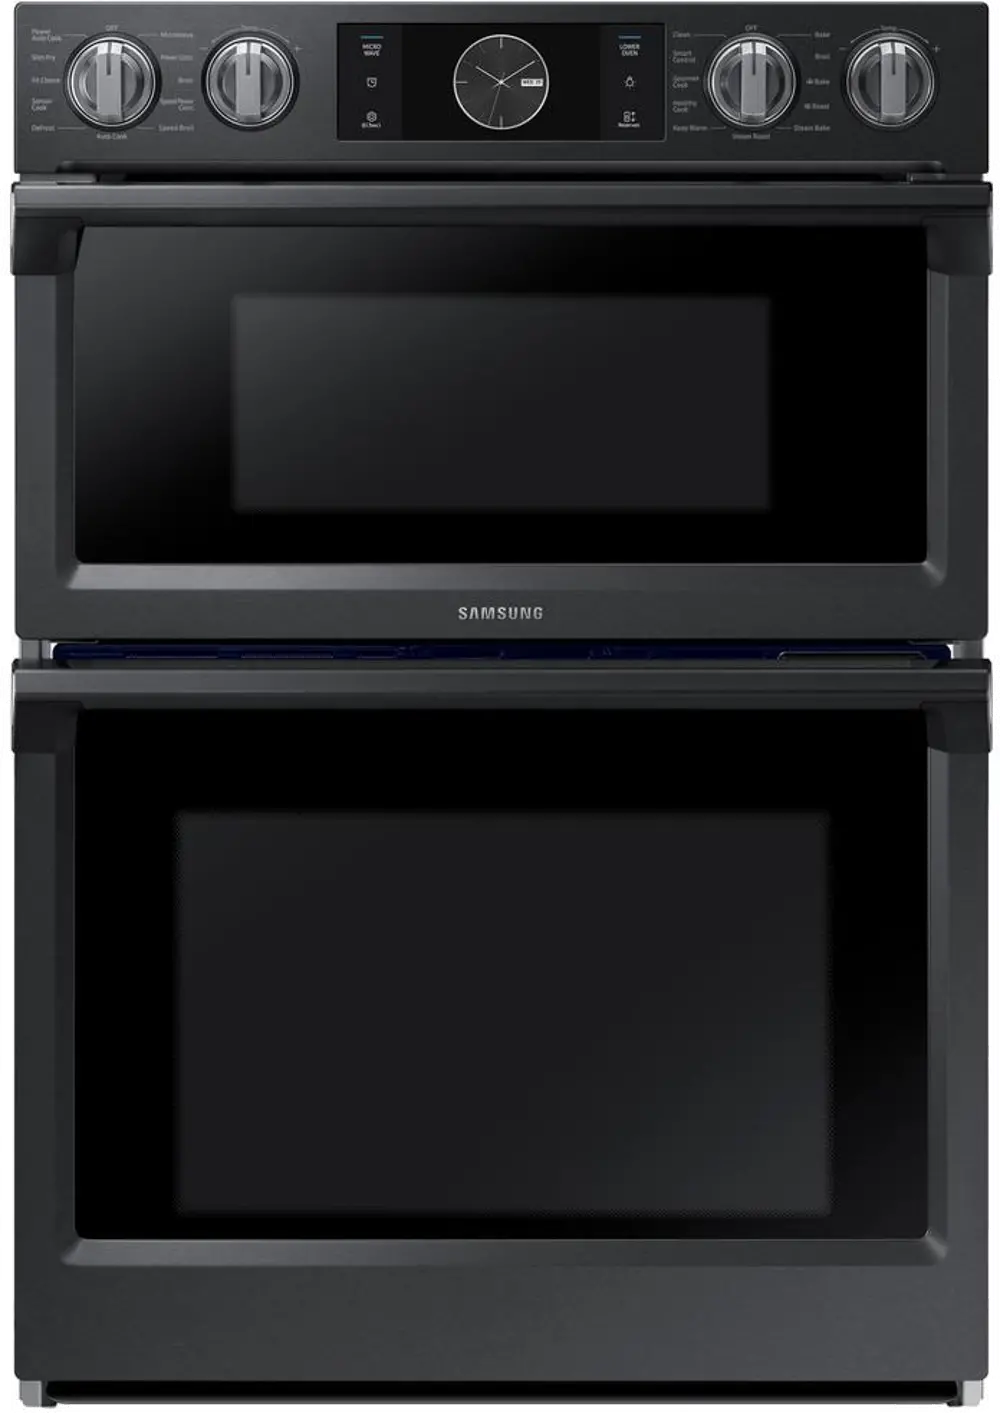 NQ70M7770DG Samsung 7 cu ft Combination Wall Oven - Black Stainless Steel 30 Inch-1